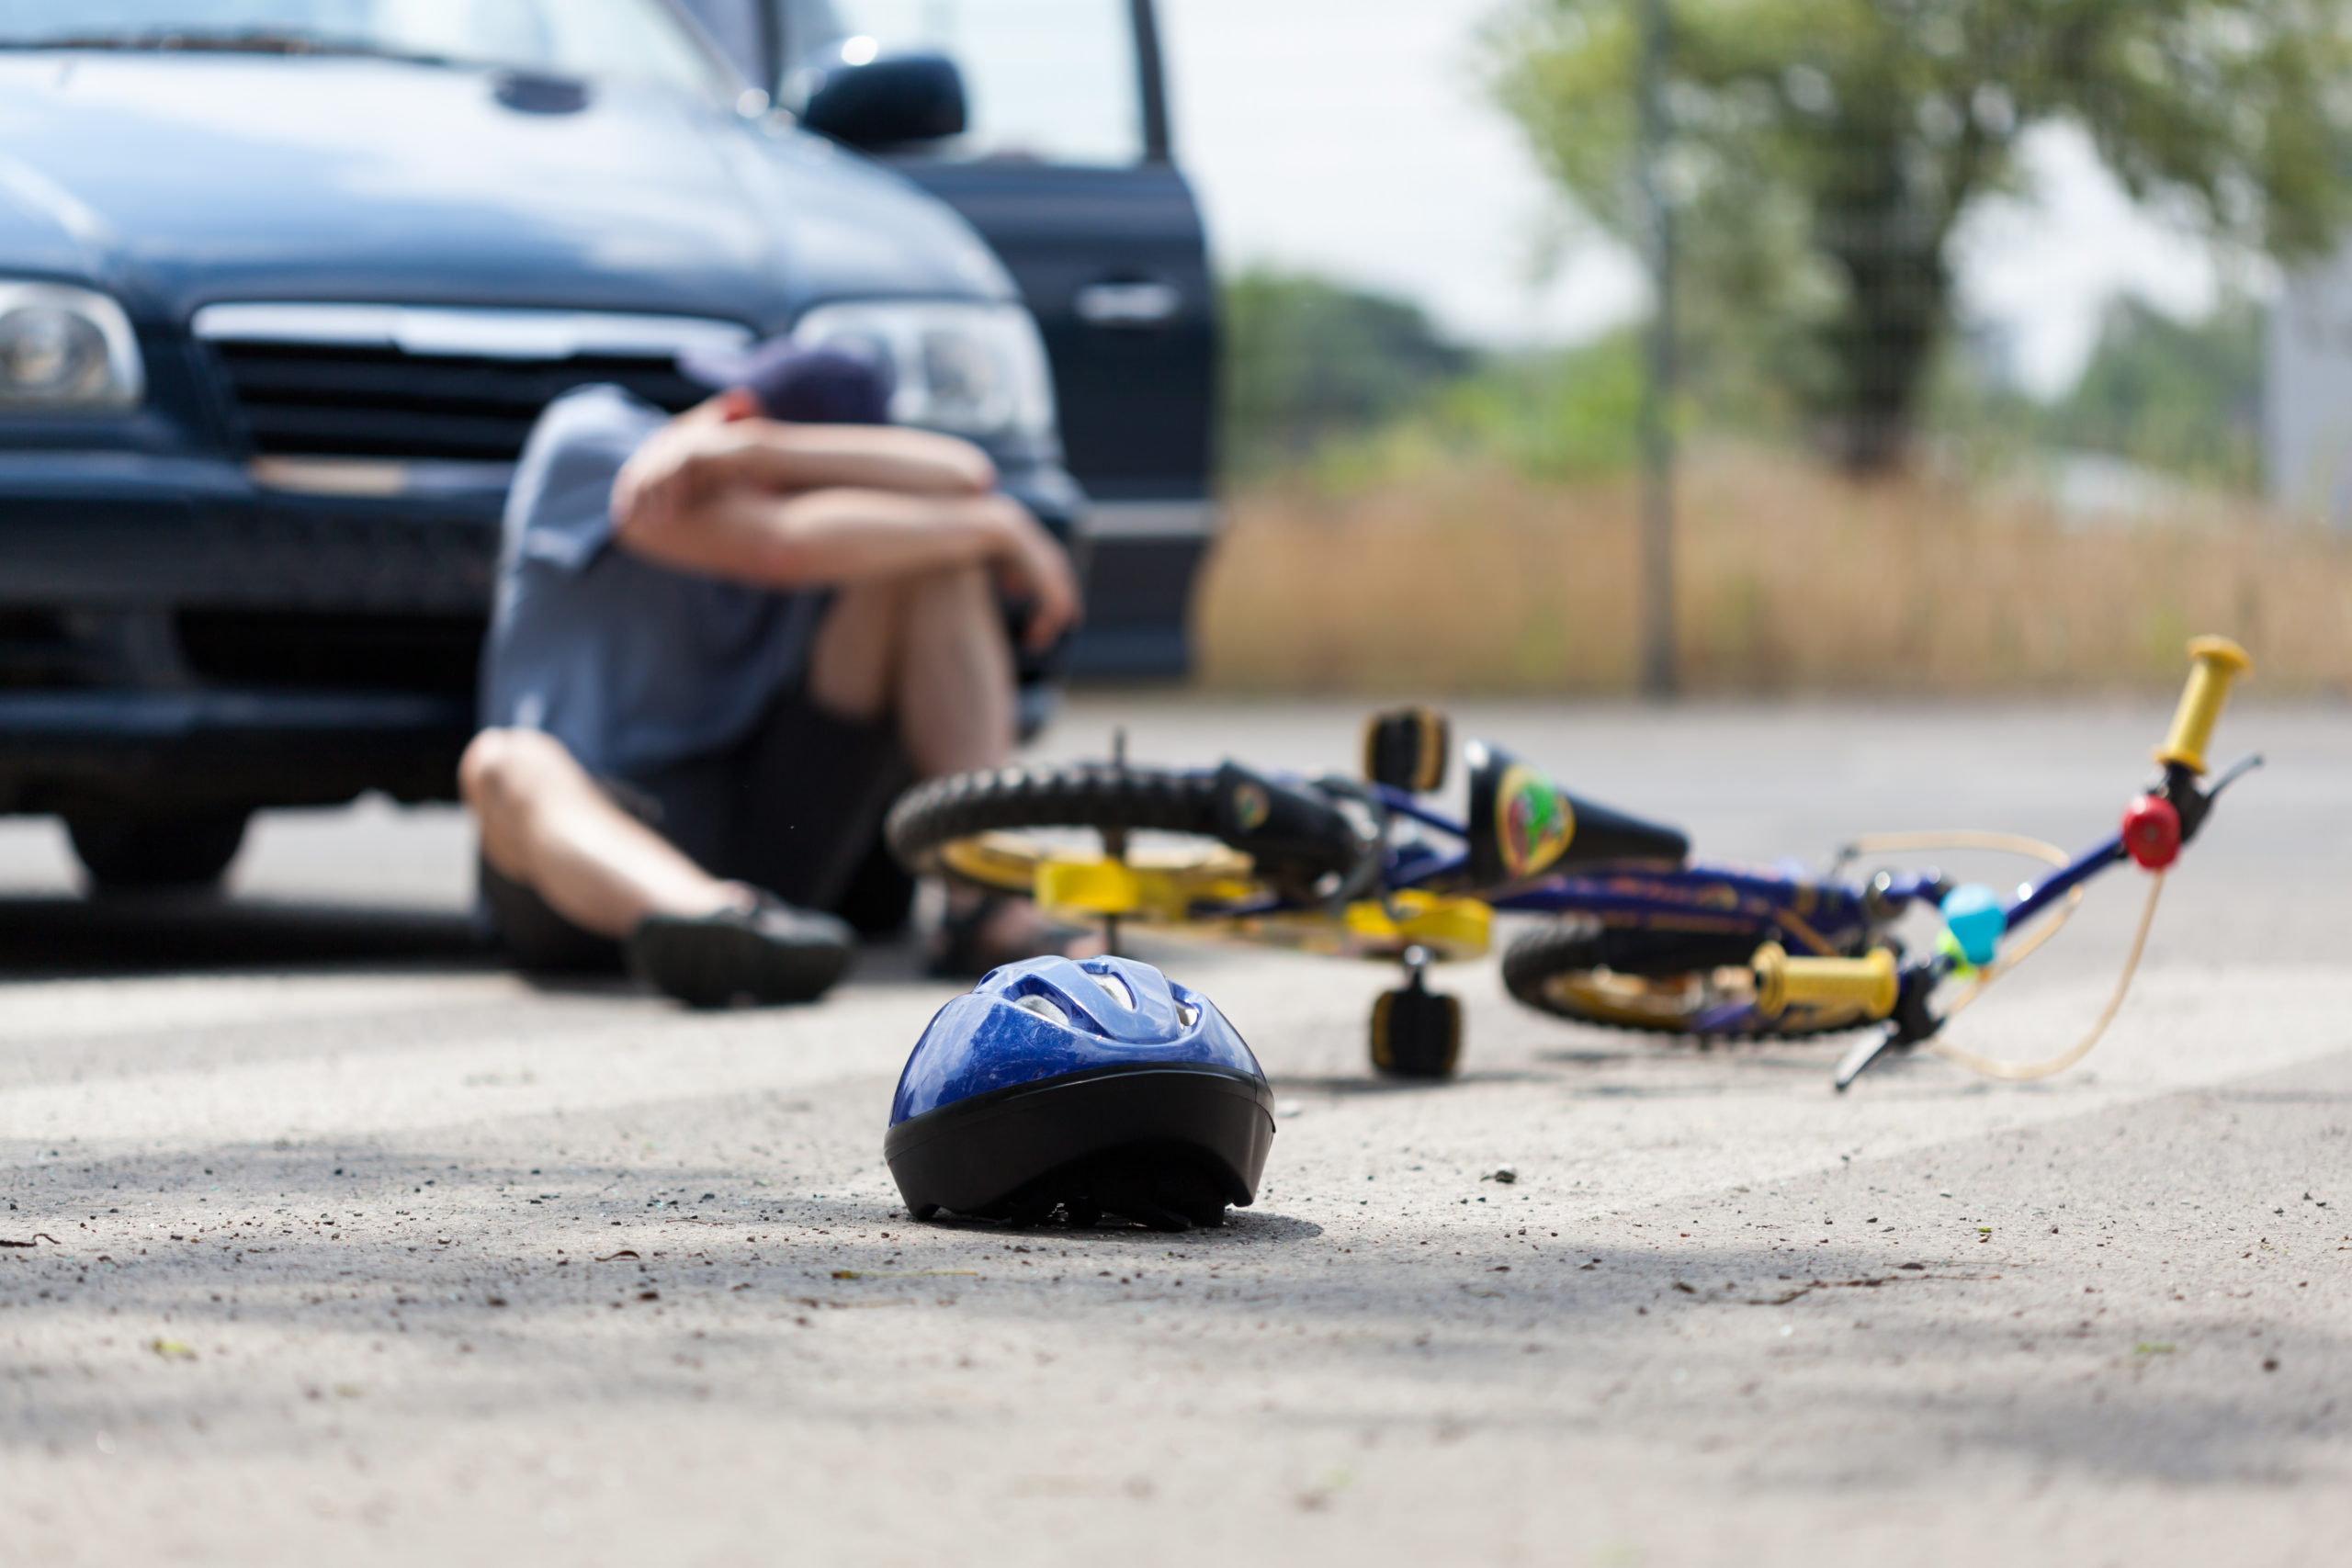 Spokane Valley Bicycle Accident Attorney